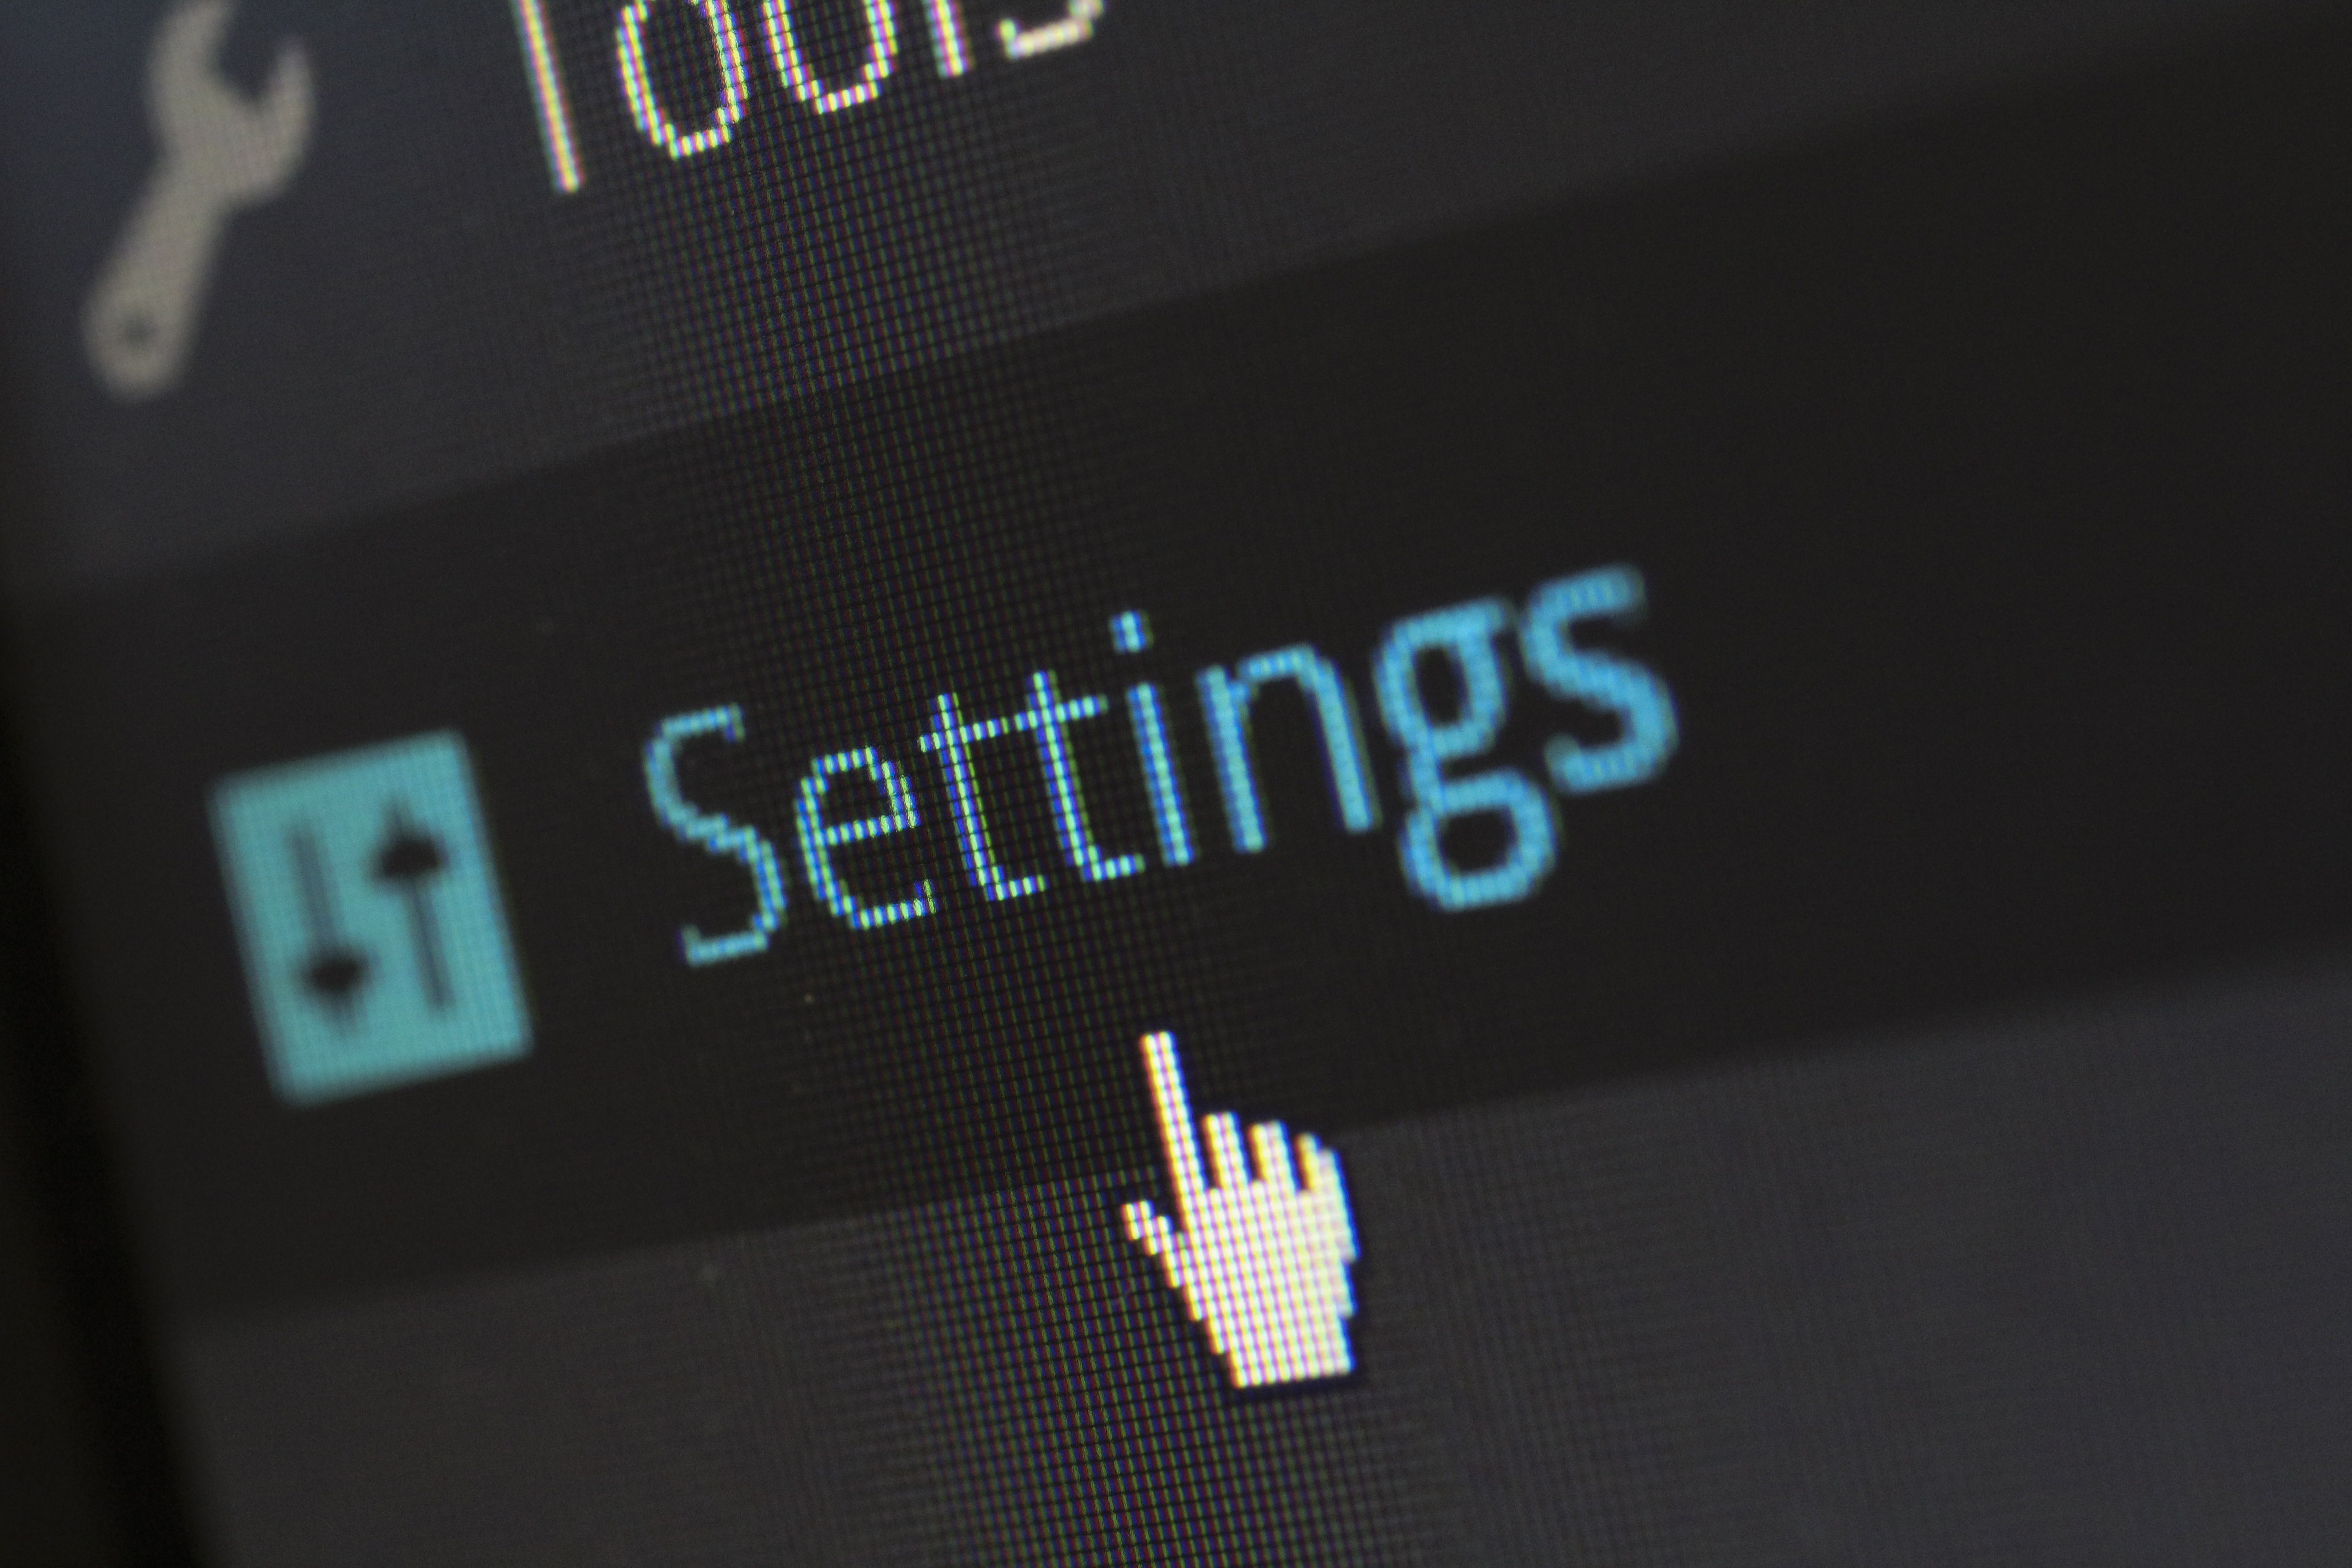 An image showing part of the WordPress interface for the settings section.